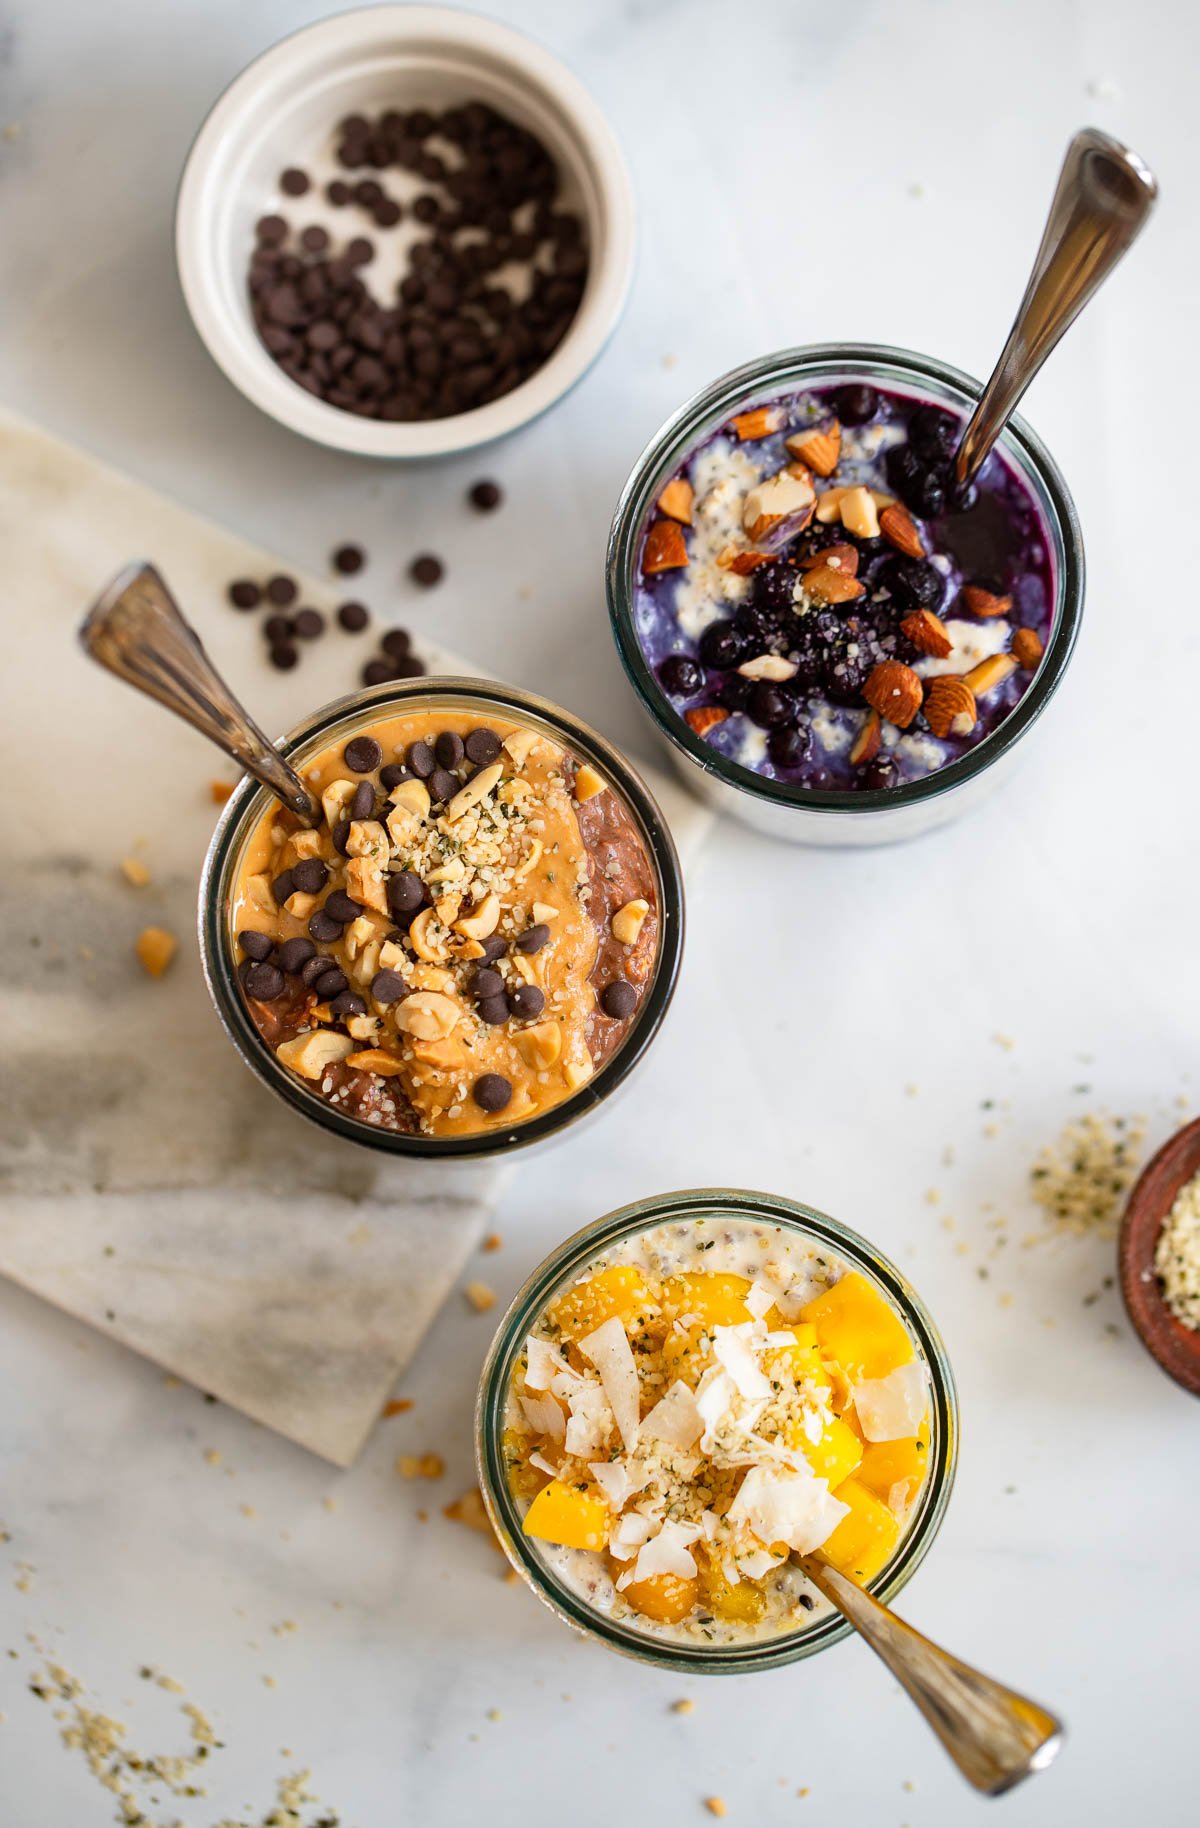 3 jars of overnight oats with different flavors like blueberry and chocolate peanut butter.